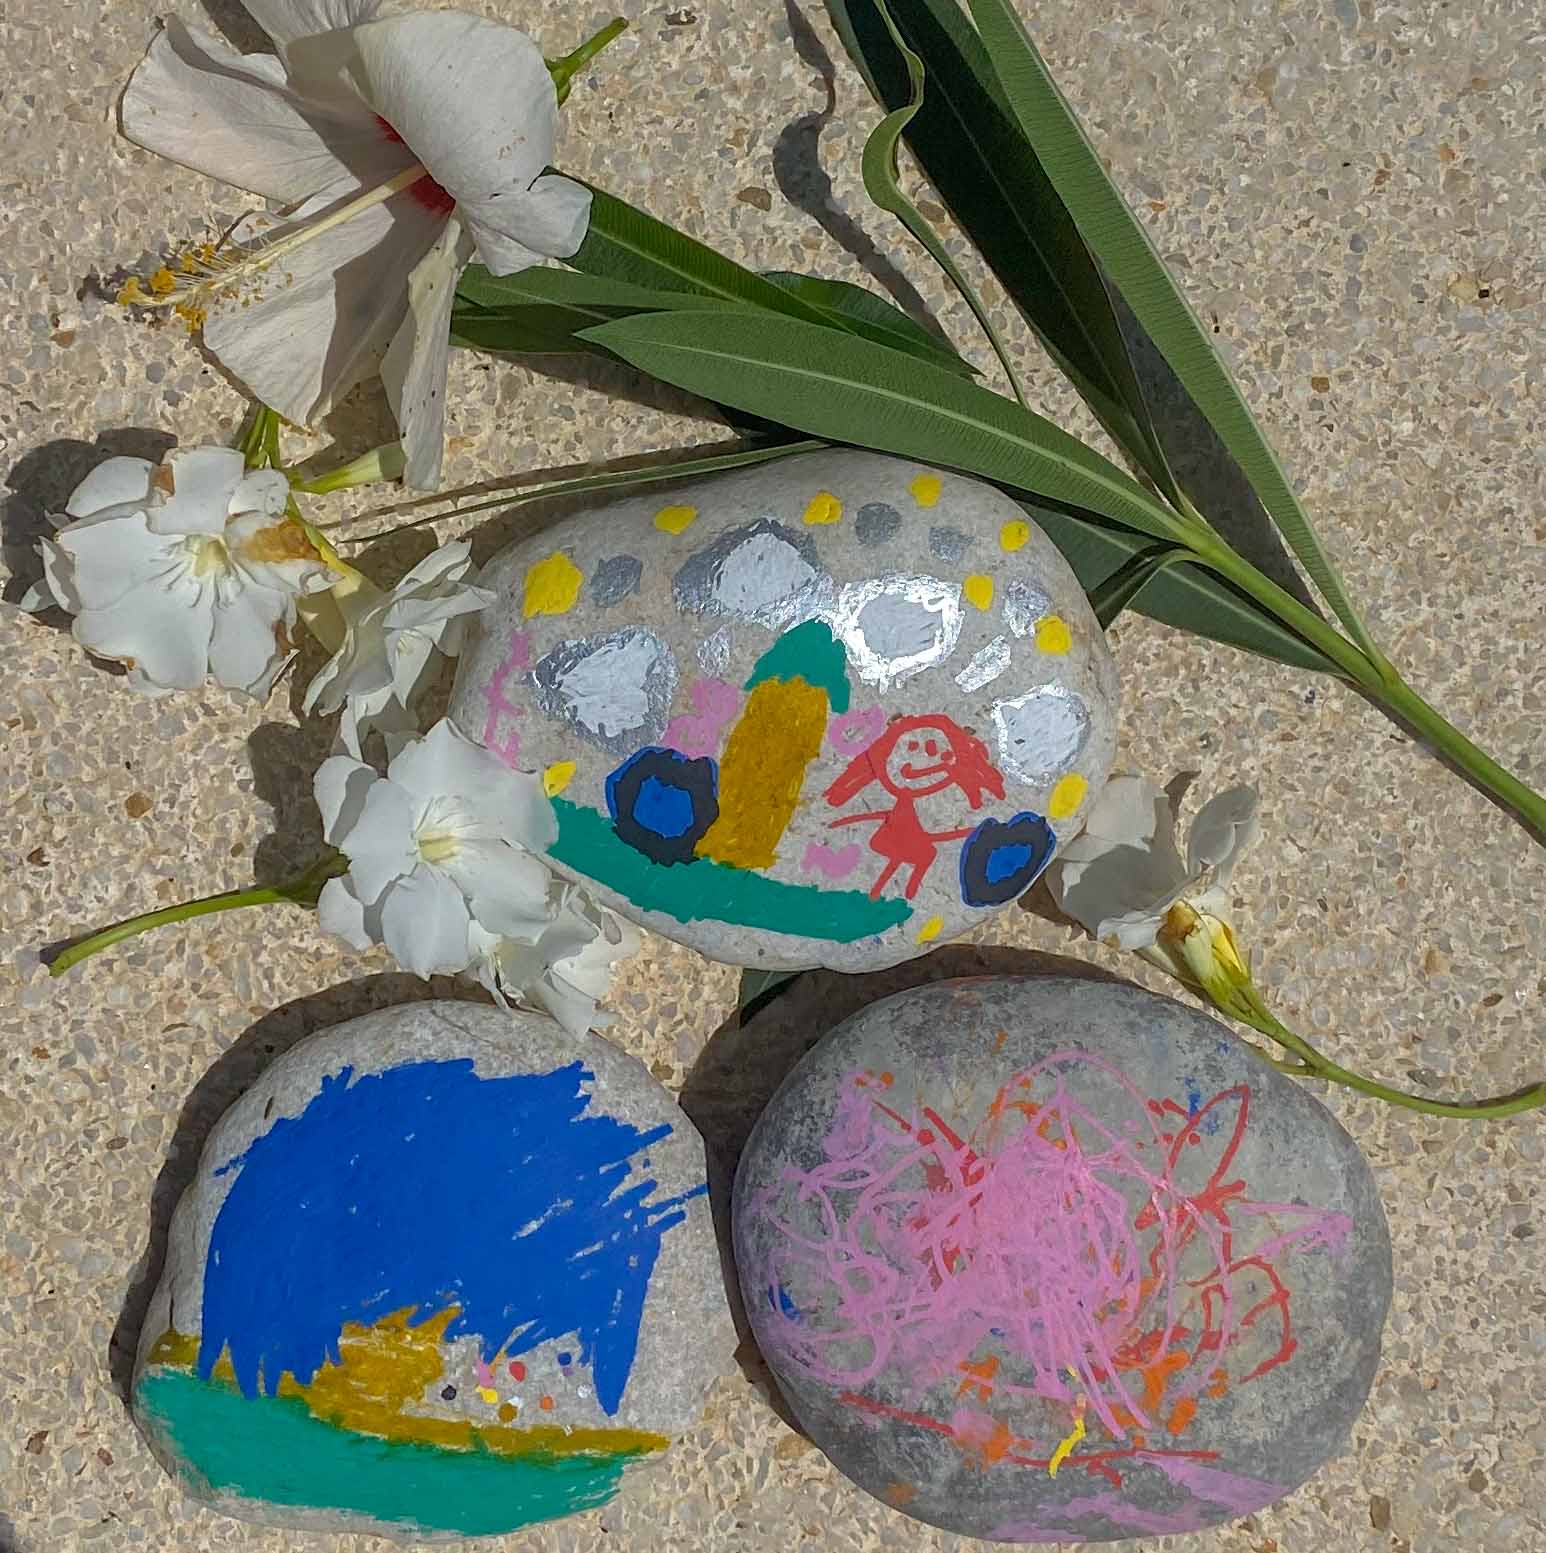 3 round stones that have been painted on by young children